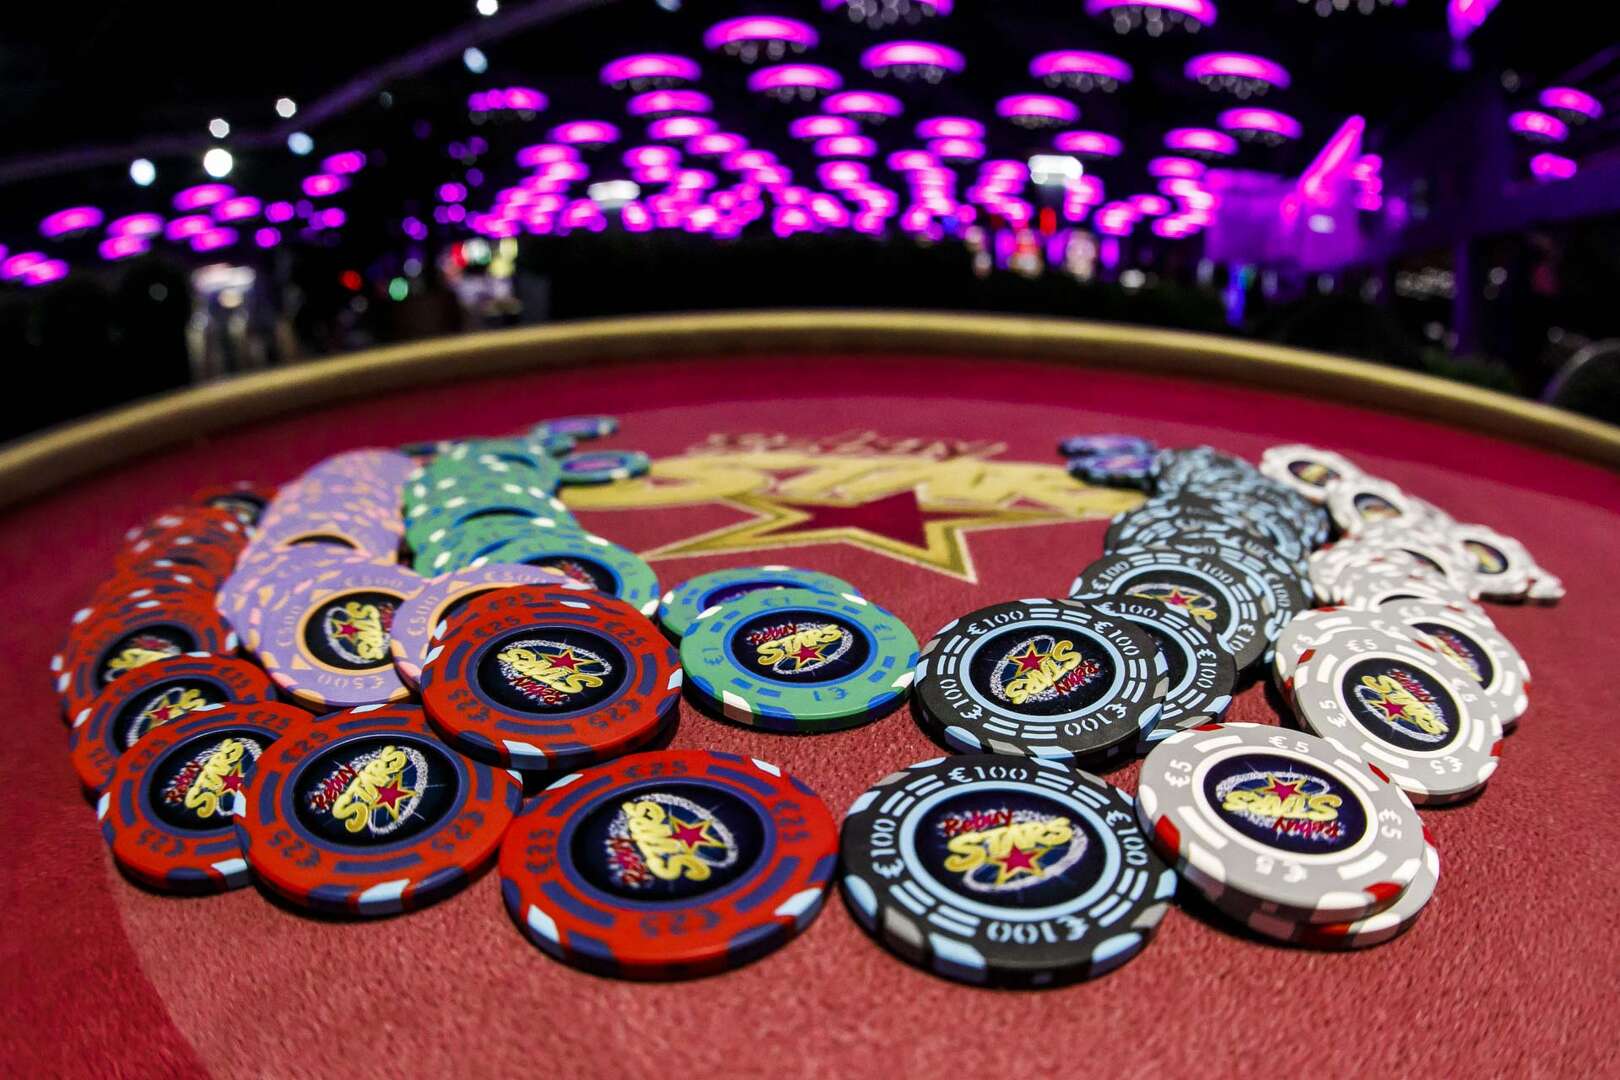 Poker is back! Cash Game Night at Rebuy Stars Casino Elected this Friday